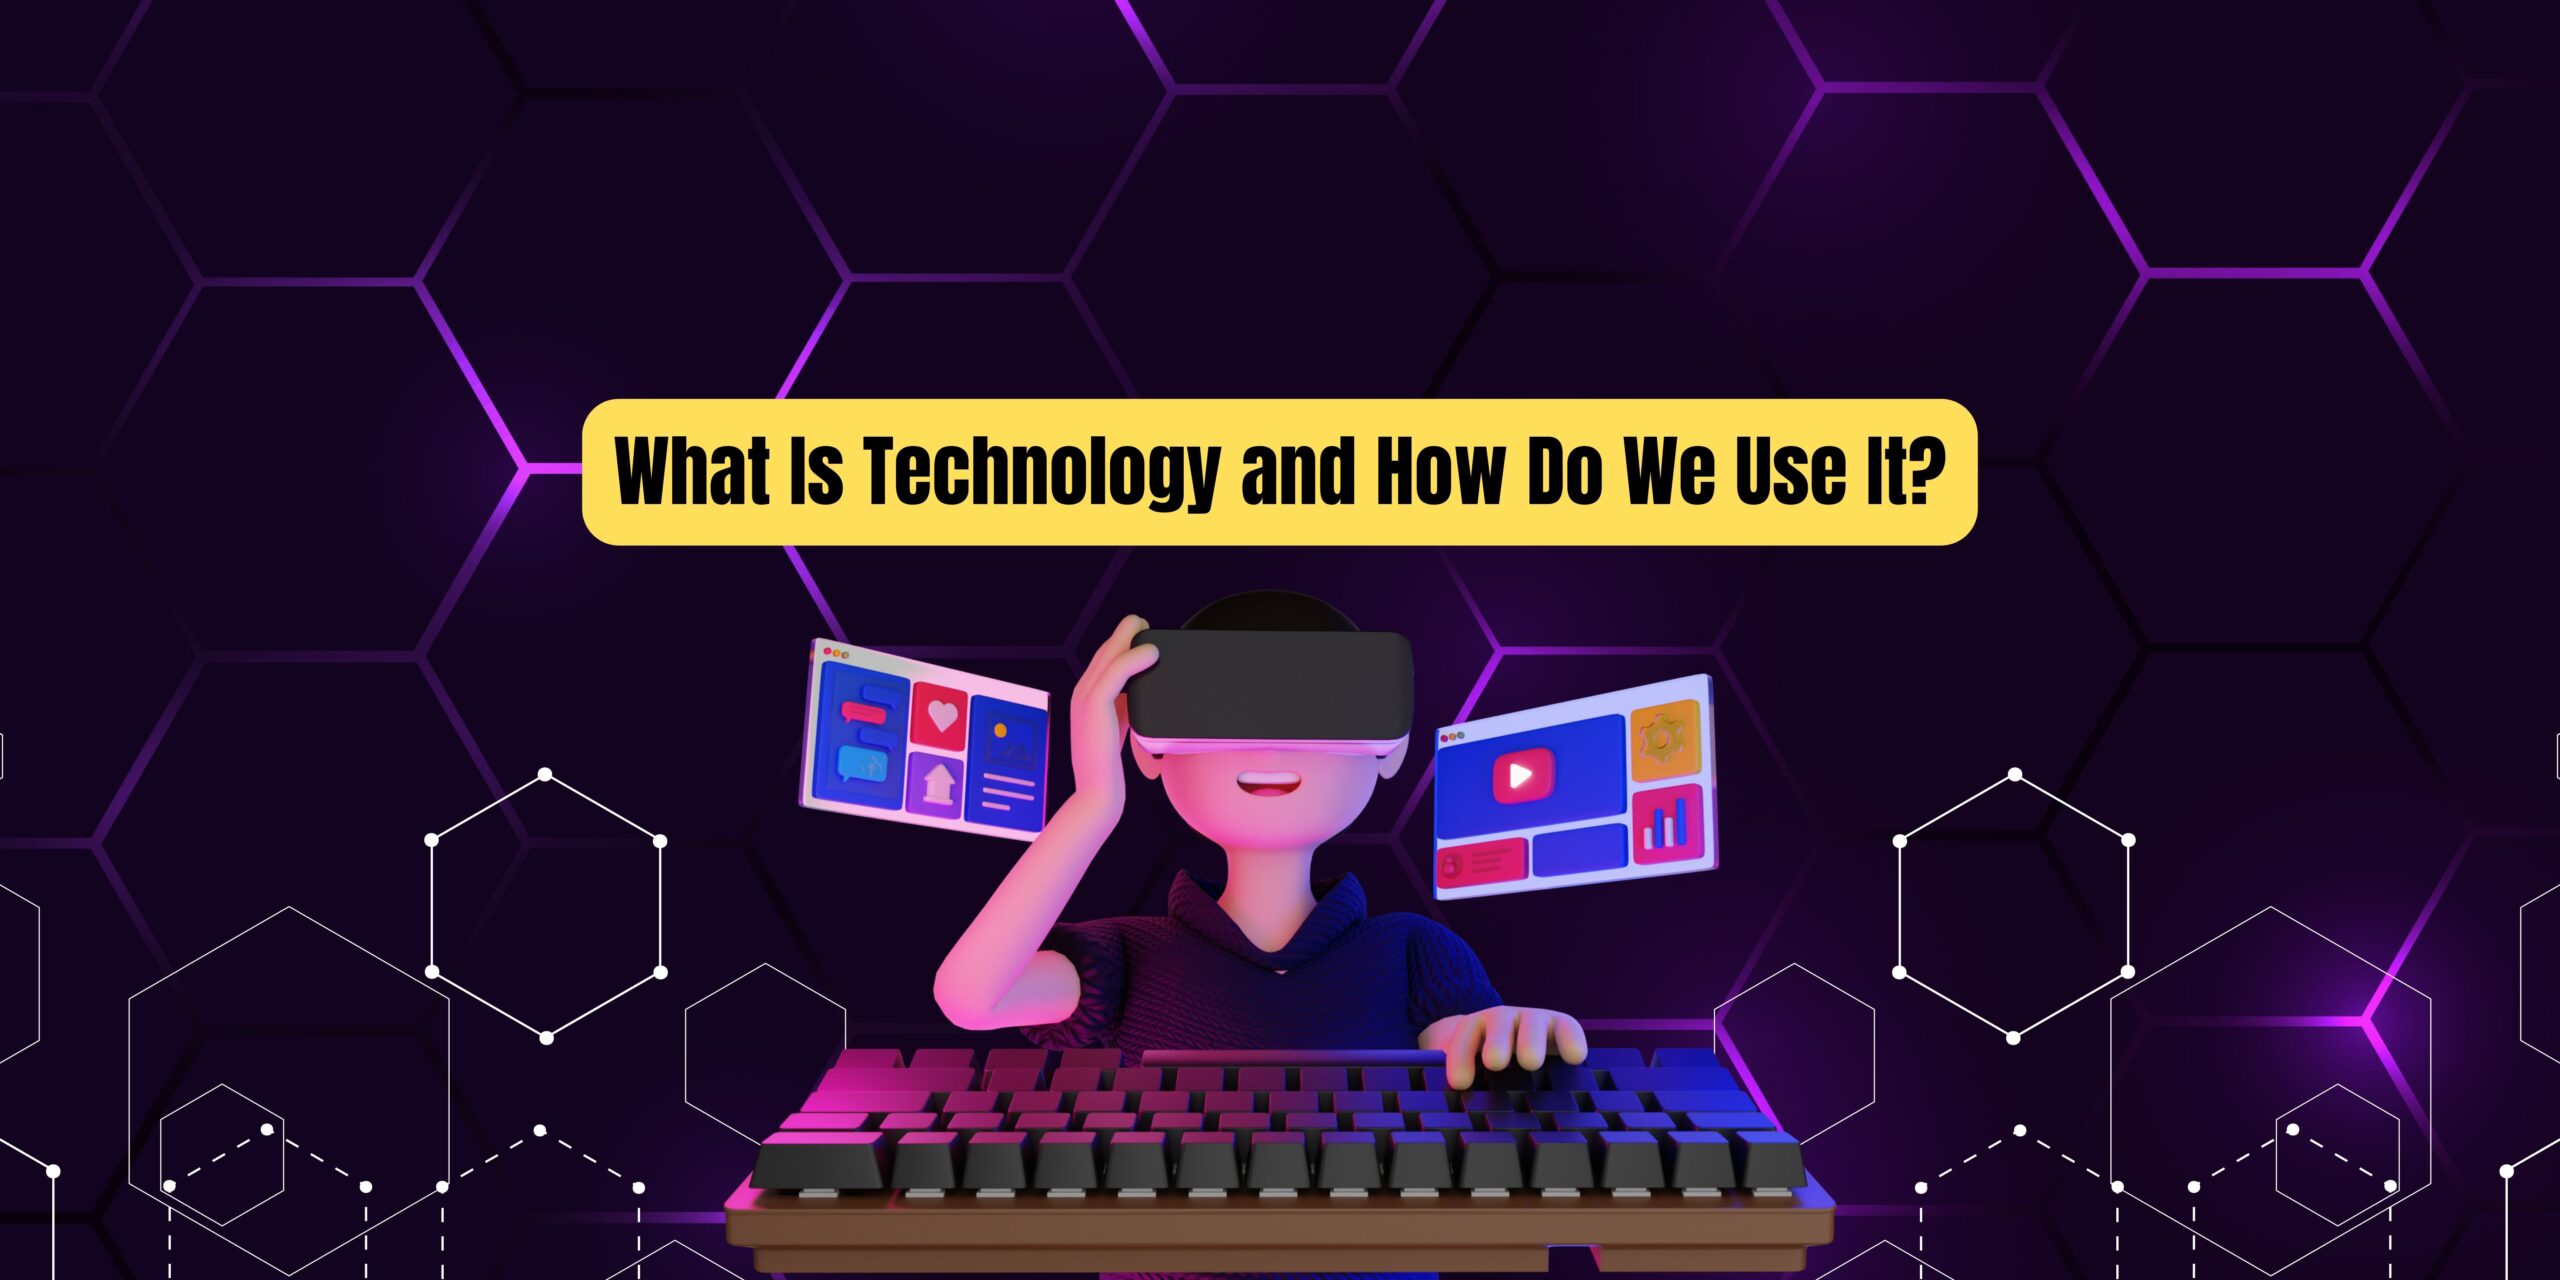 What Is Technology and How Do We Use It?